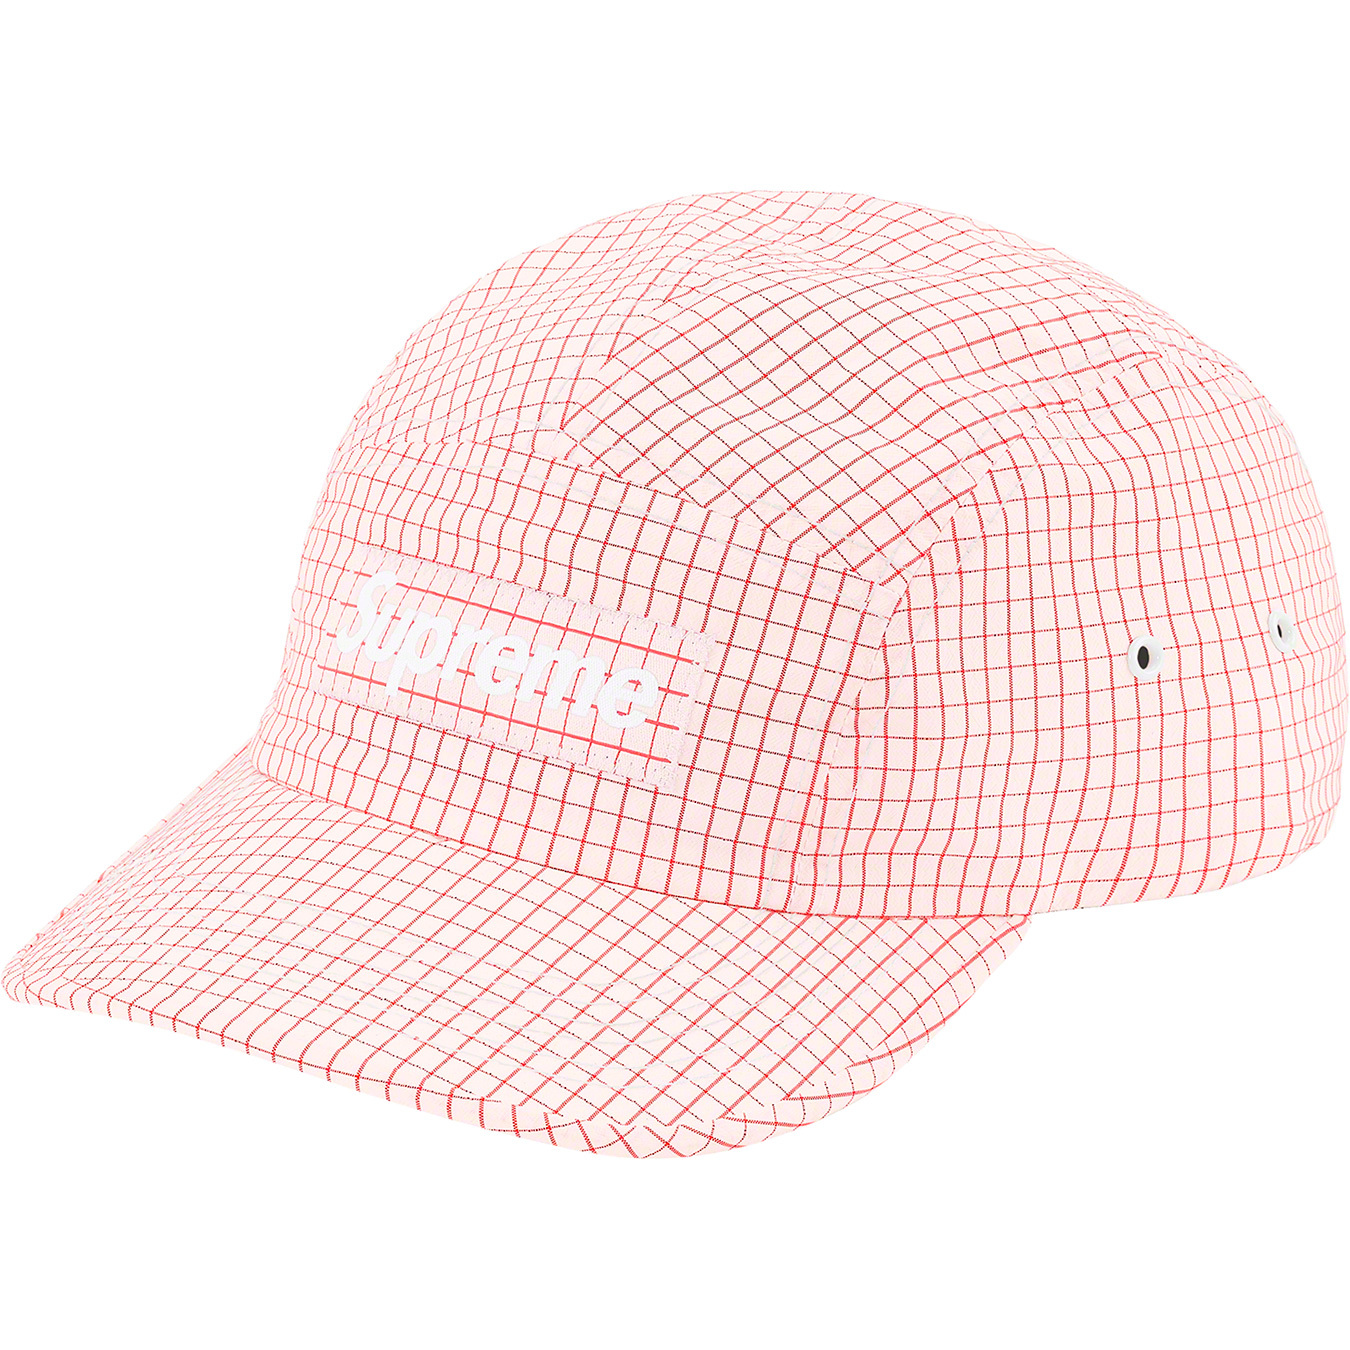 Supreme 2-Tone Ripstop Camp 5 panel pink checkered hat camp Cap (SS21) white